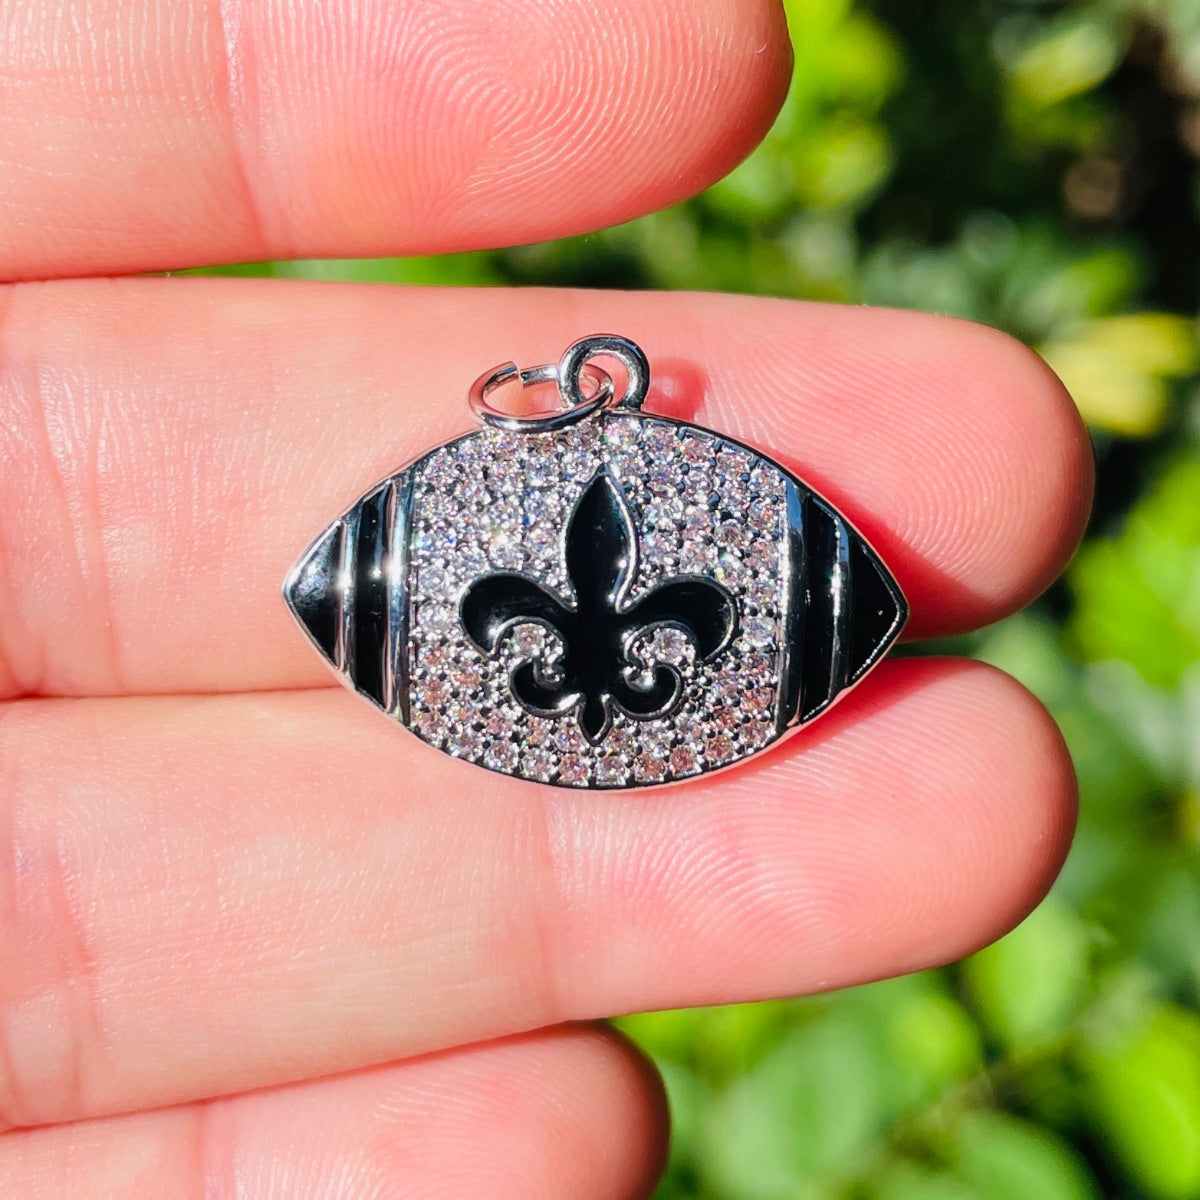 10pcs/lot 25.7*18.7mm Fleur De Lis CZ Saints American Football Charms Silver CZ Paved Charms American Football Sports Louisiana Inspired New Charms Arrivals Charms Beads Beyond